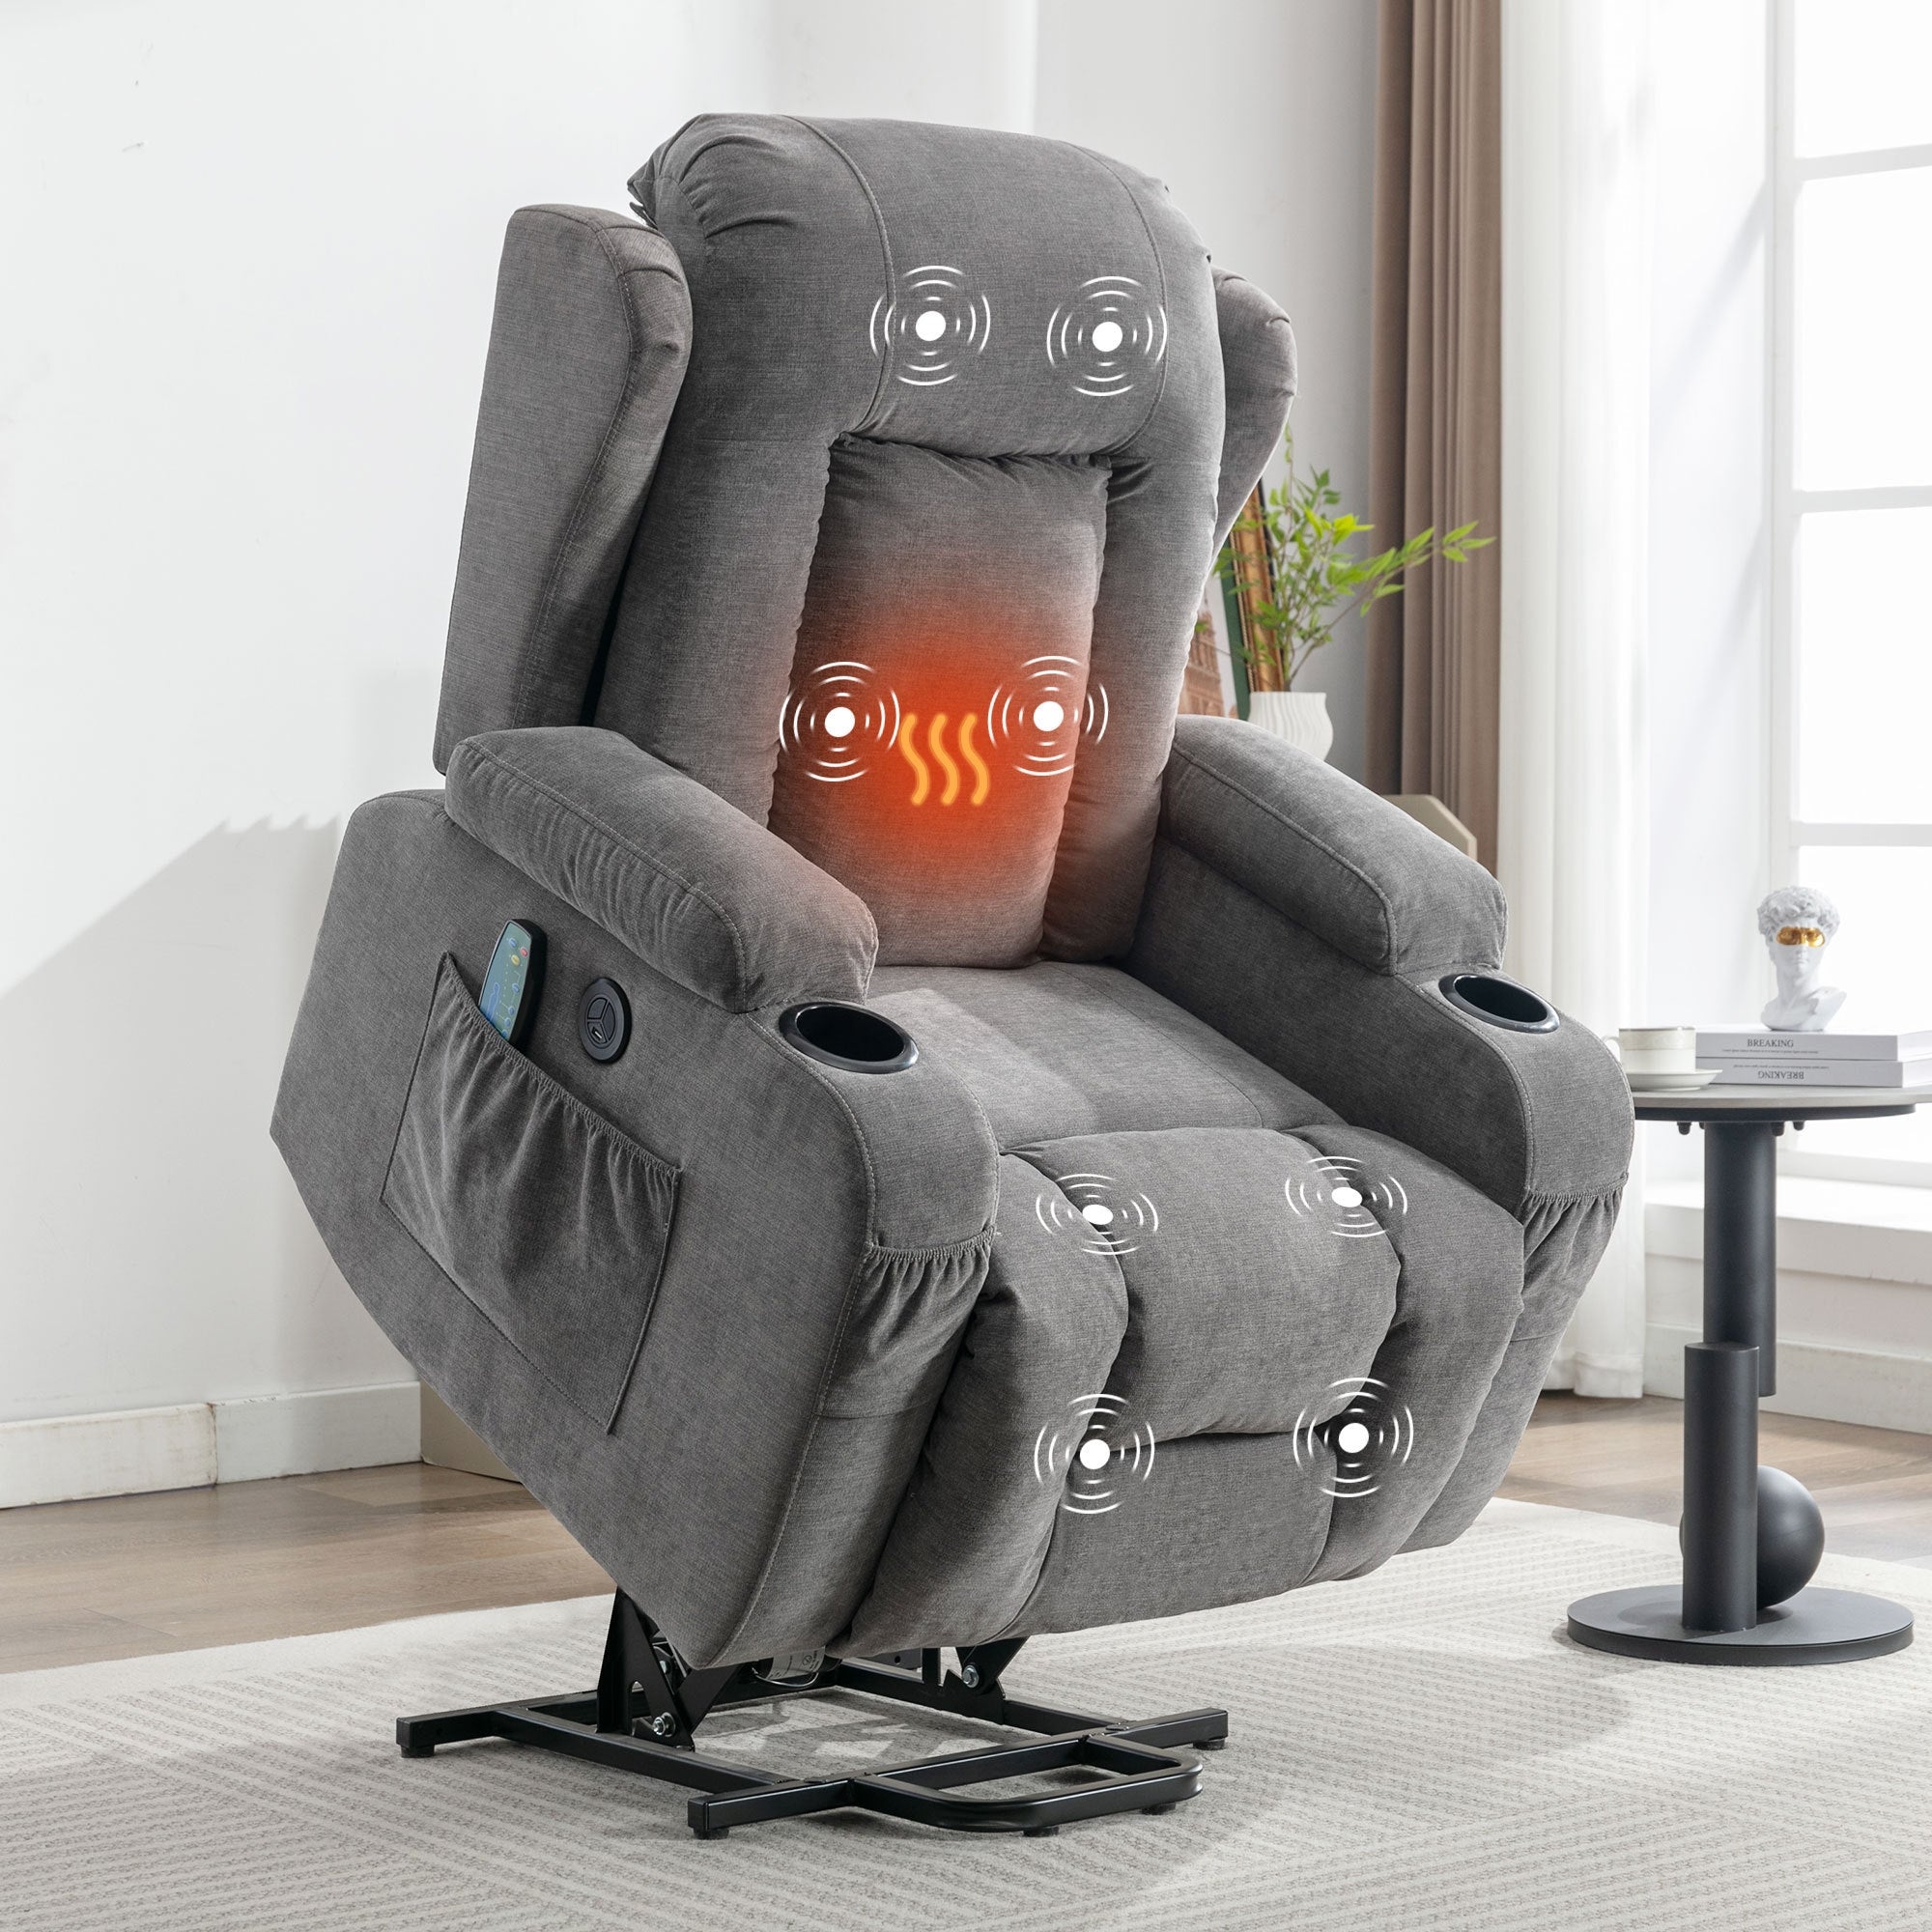 Russell Power Lift Recliner Chair With Heat and Massage, USB Charge Port and Side Pocket